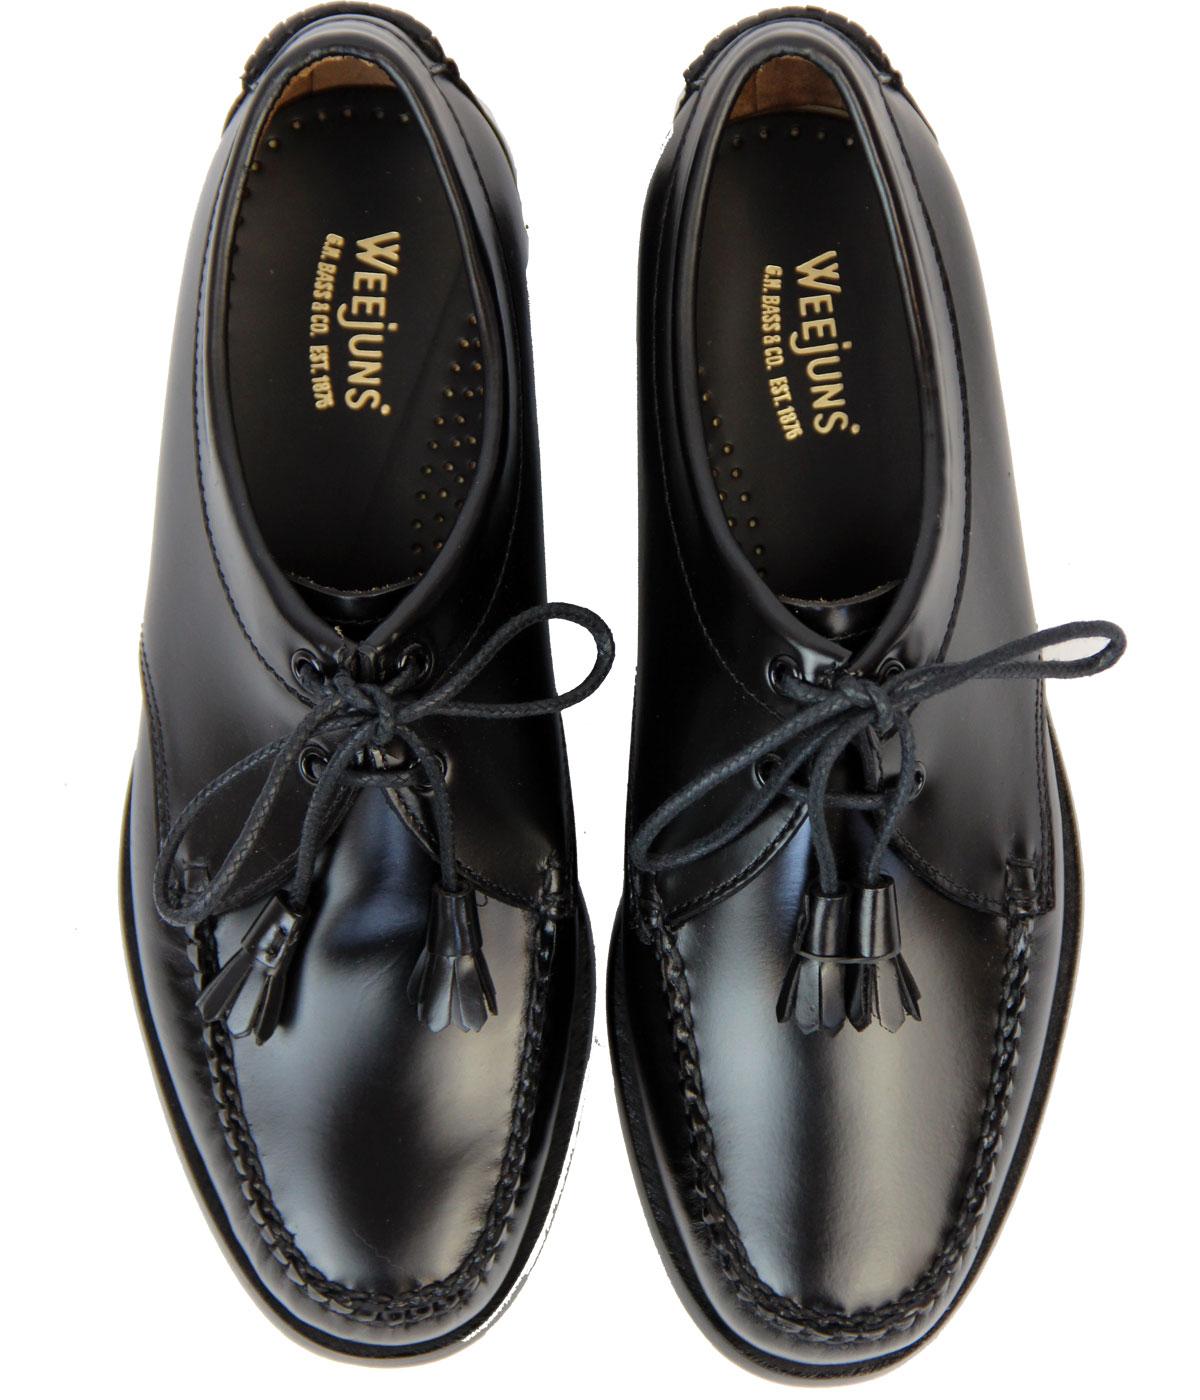 BASS WEEJUNS Hand Sewn Retro Tie Leather Shoes in Black